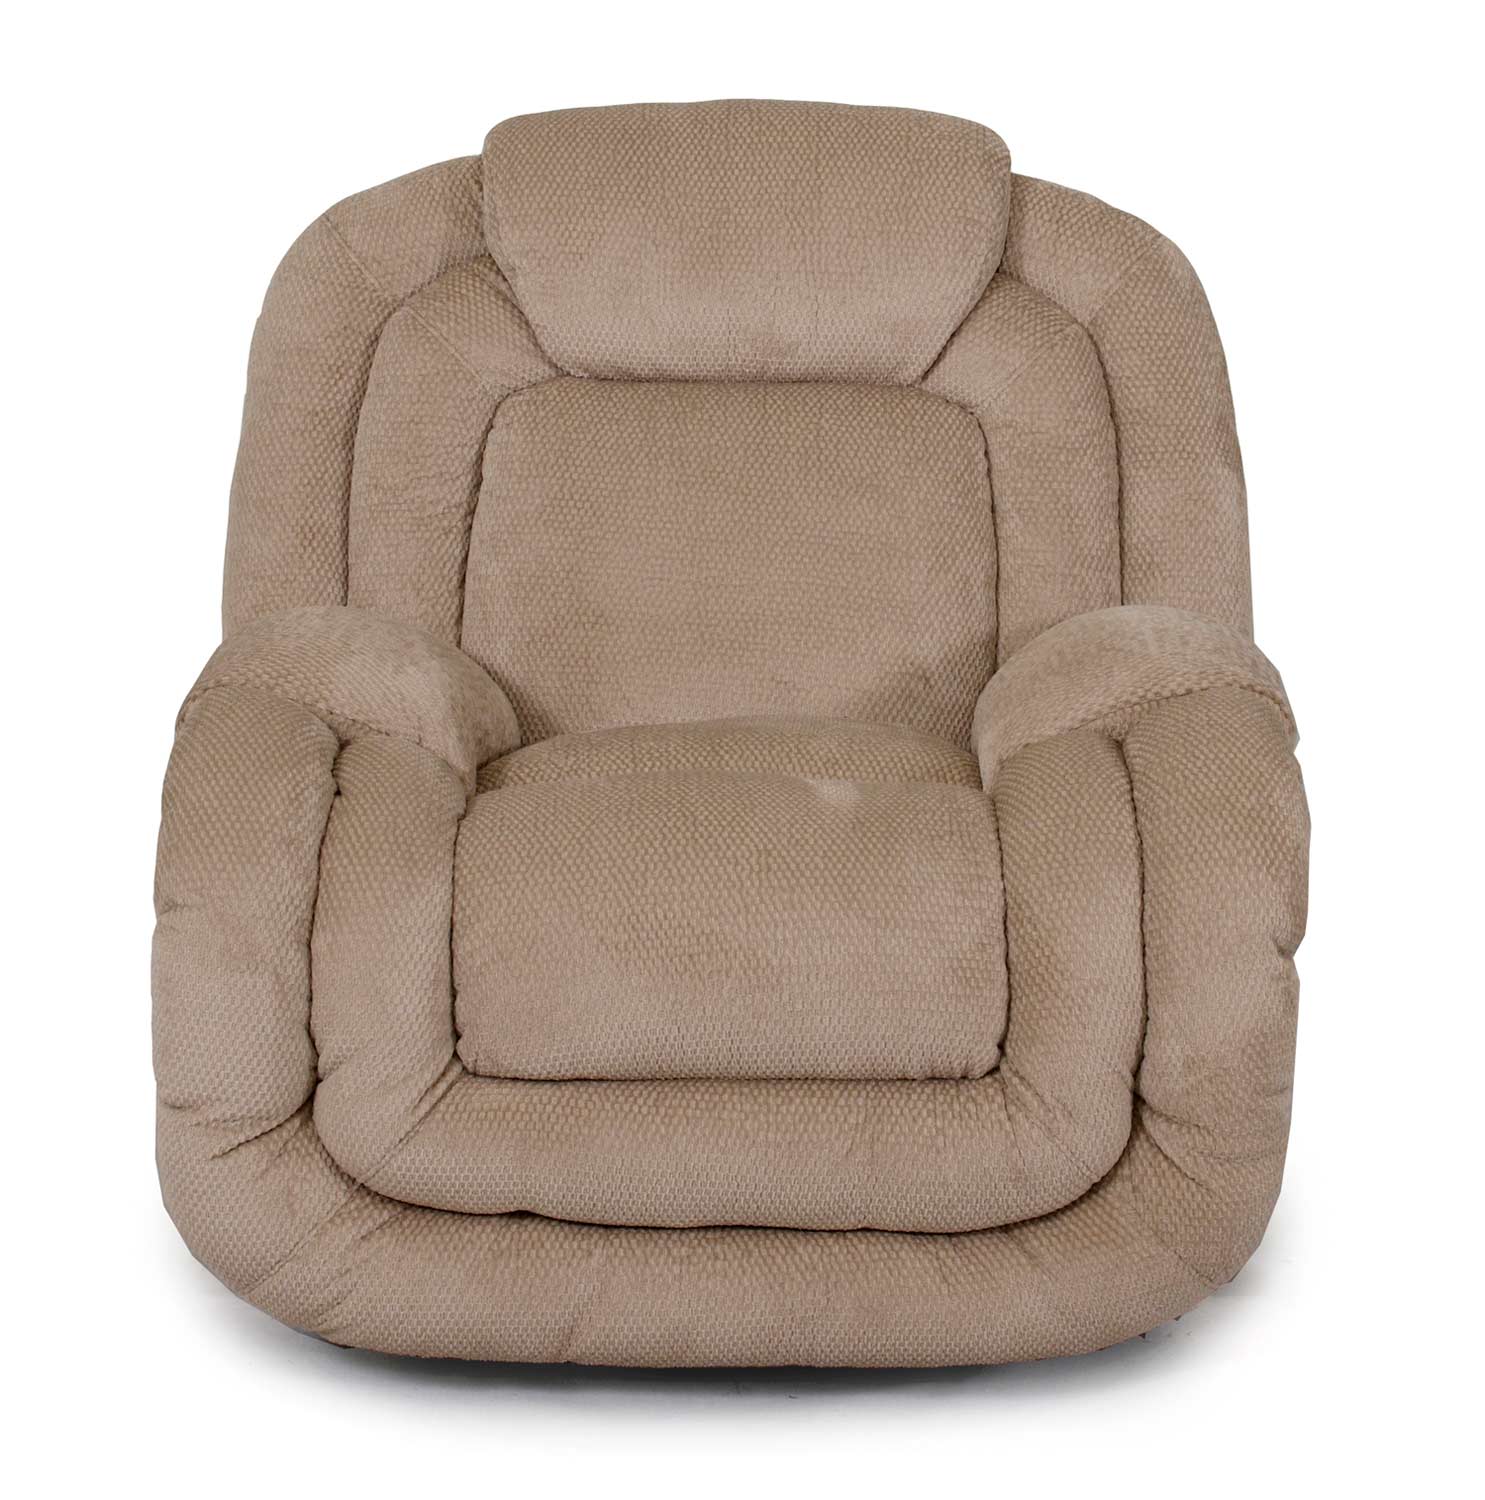 Barcalounger Apex II Casual Comforts Recliner Chair - Dallas Mink